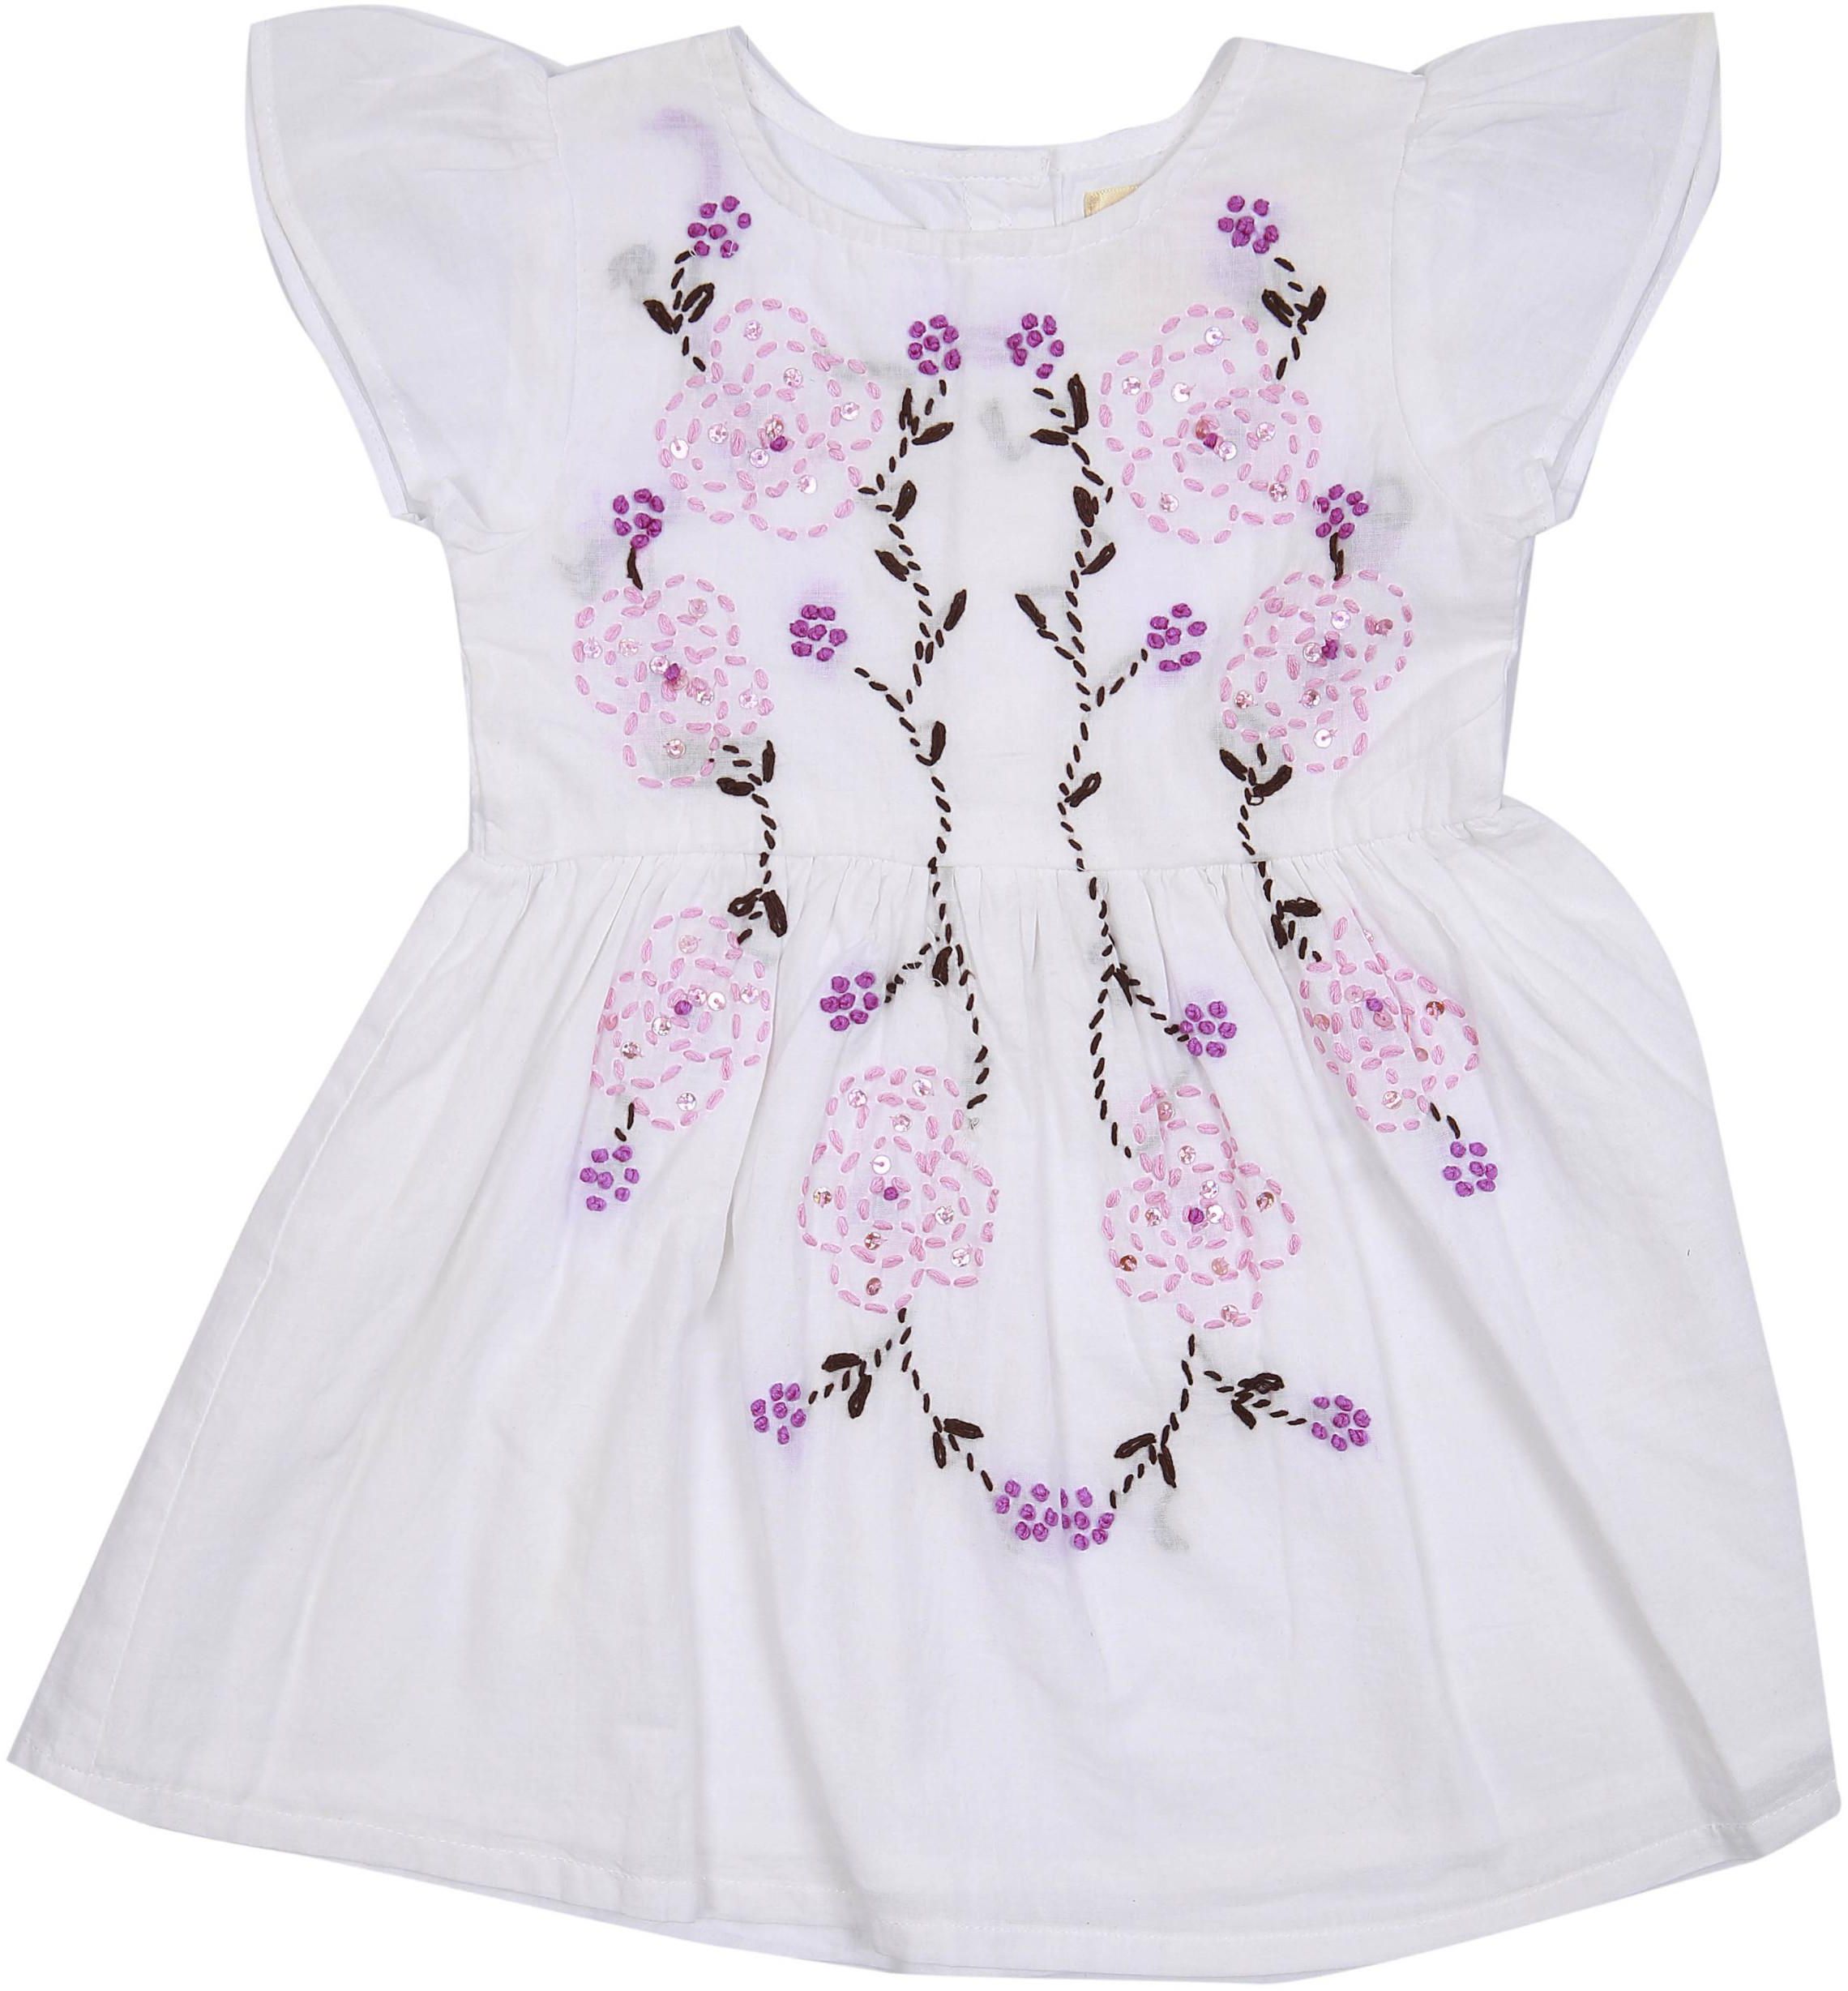 AOMI by Appleofmyi Infant Embroidery Dress P24 White Size 24-M